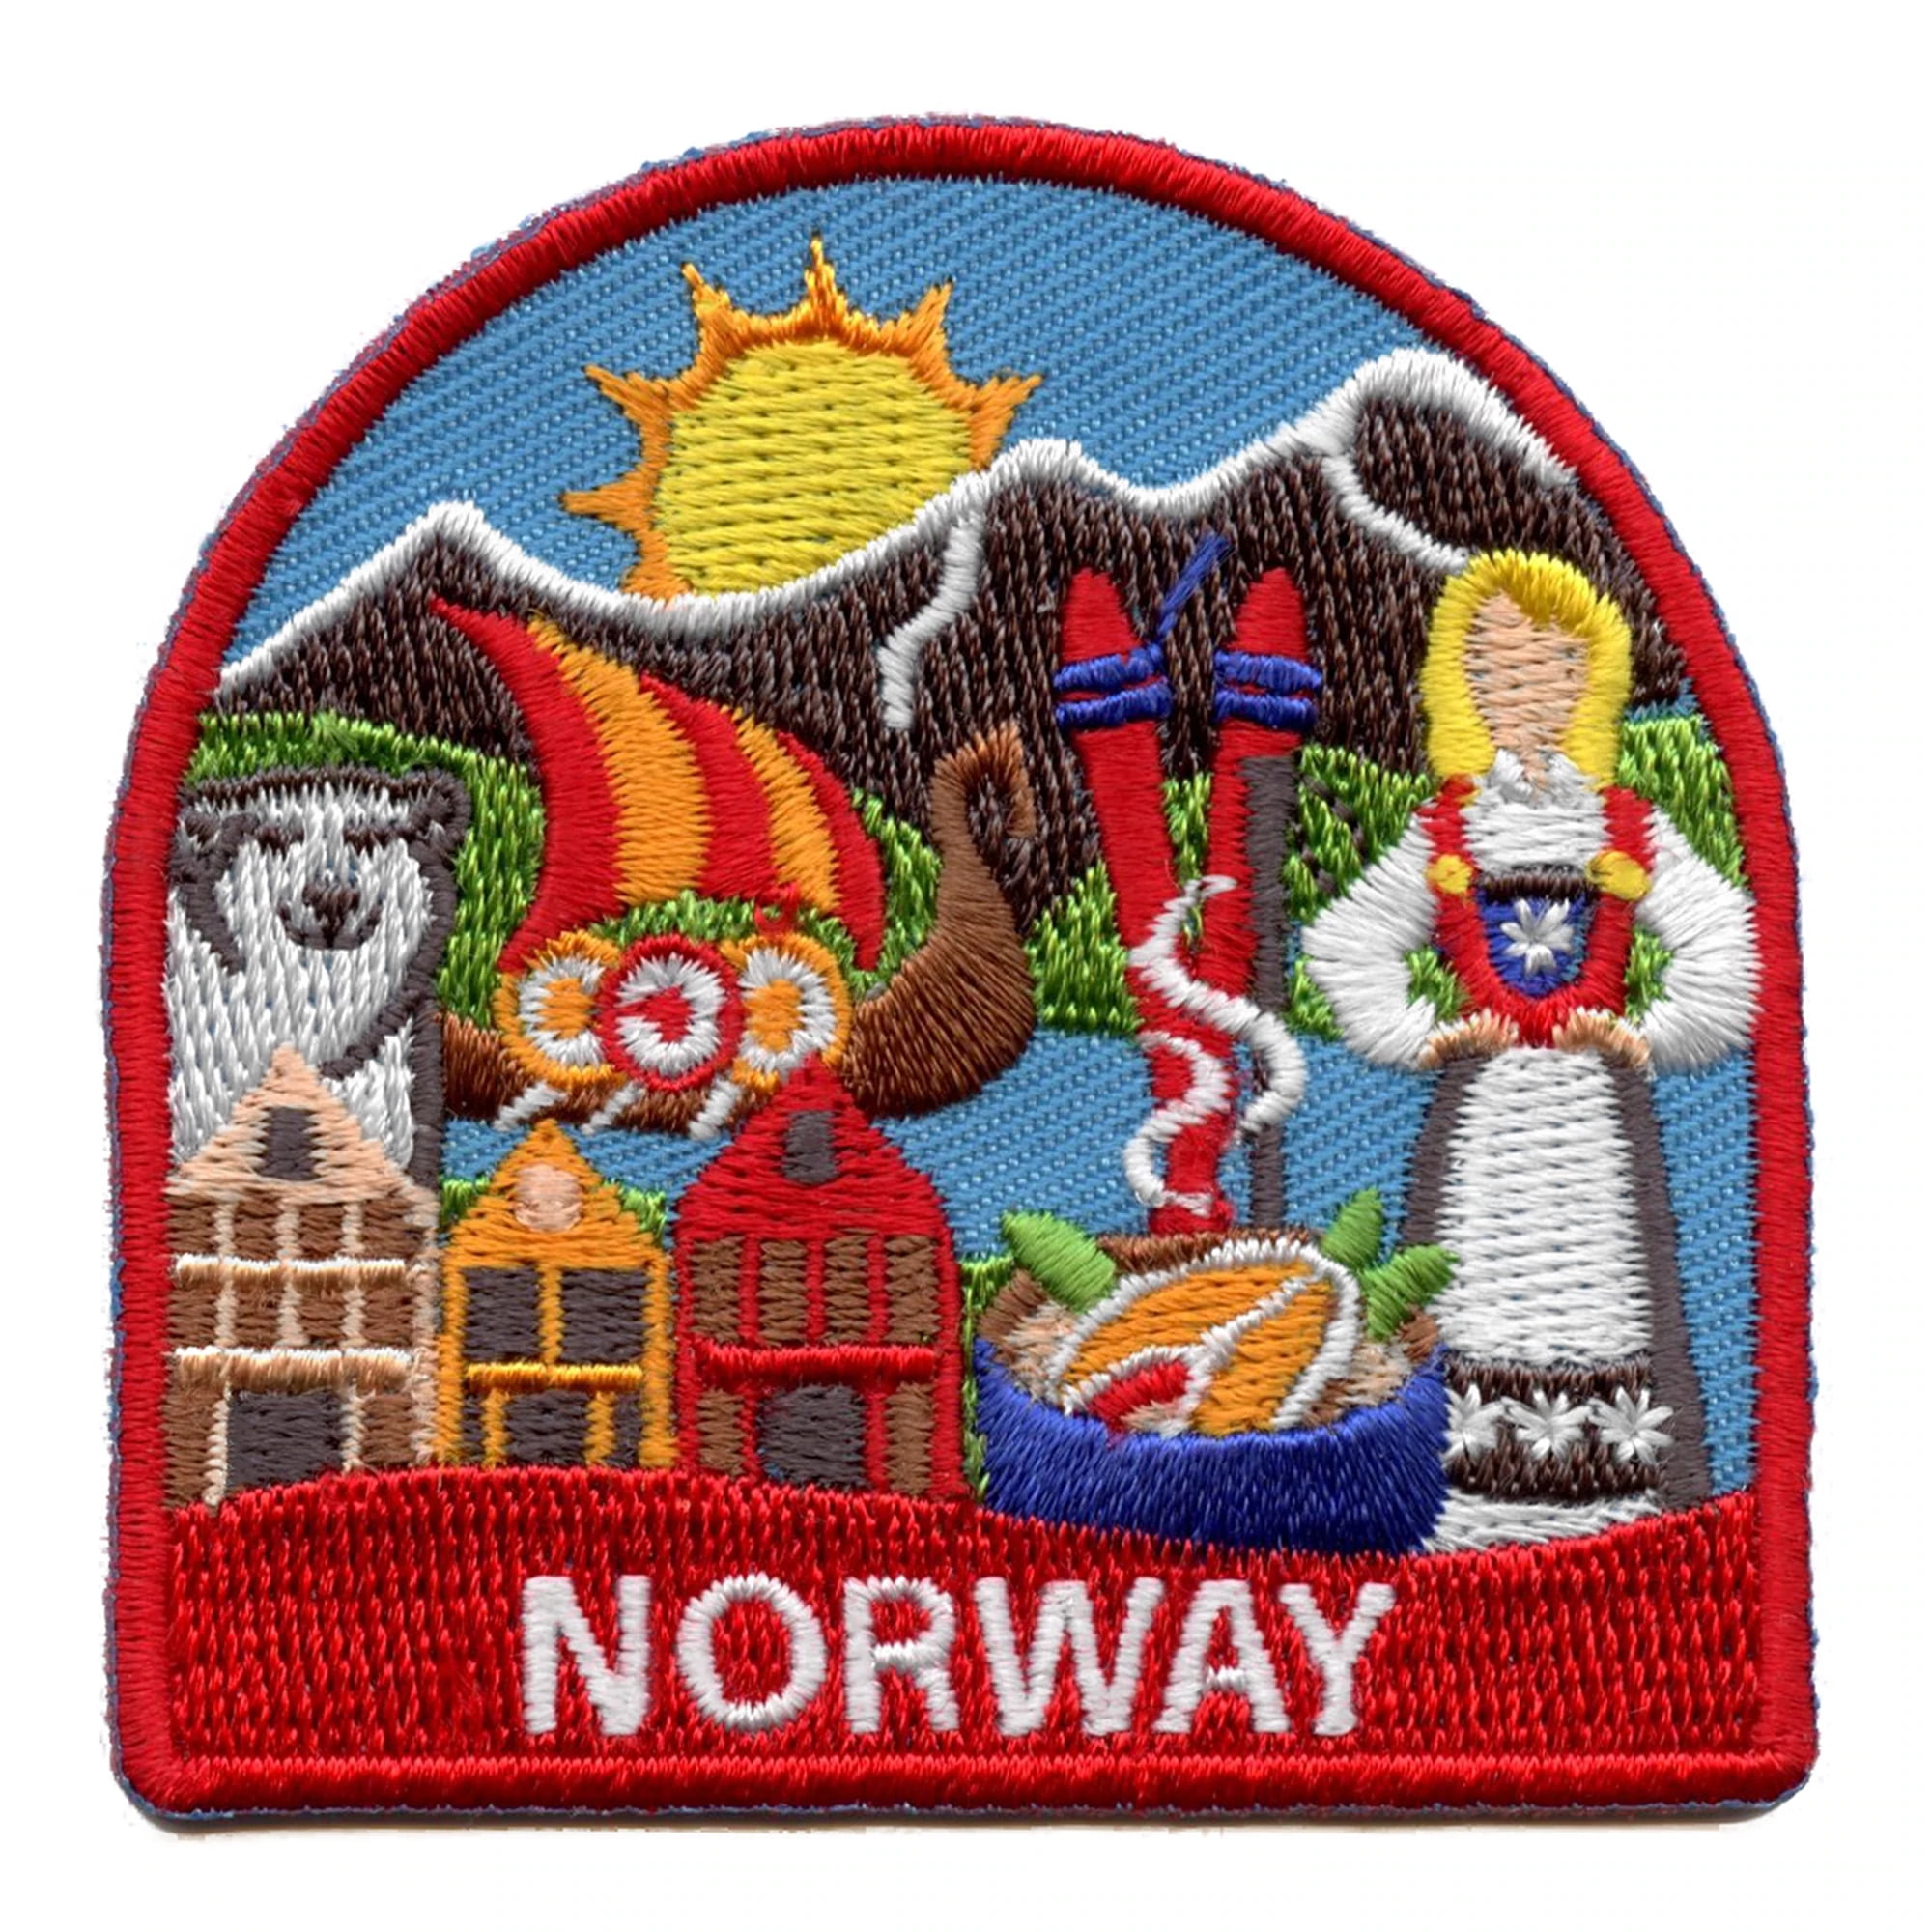 Patch printed embroidery travel souvenir shield city flag oslo norway 